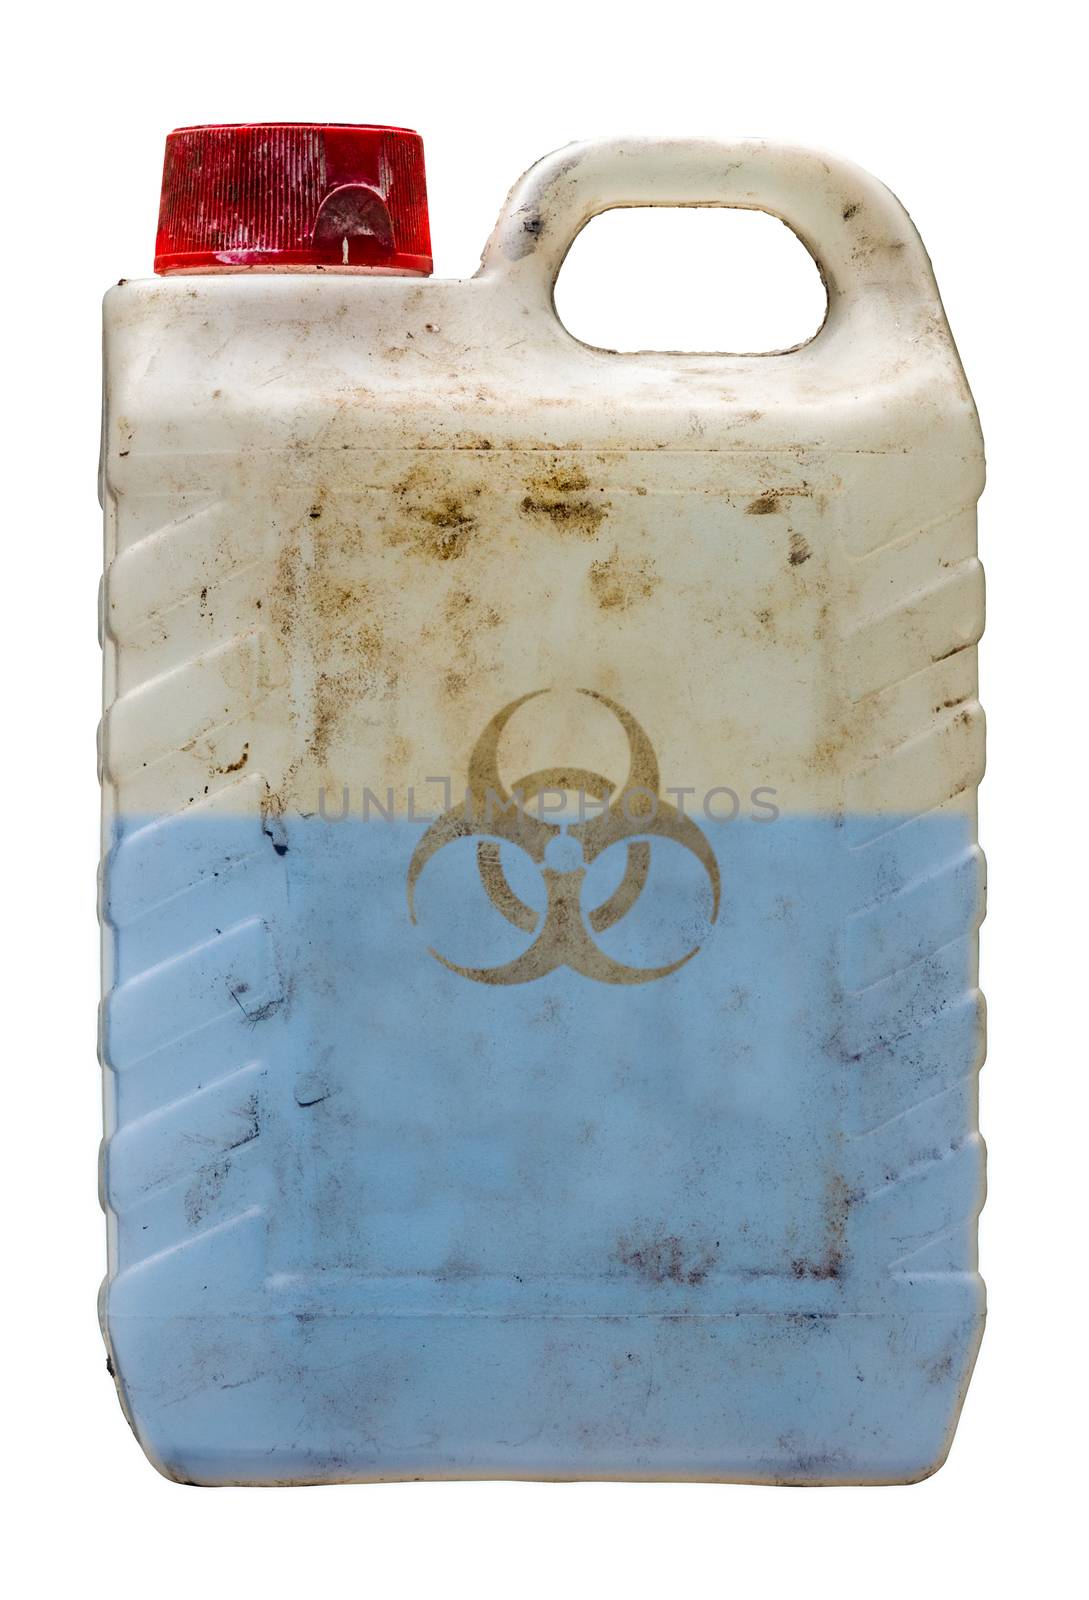 Isolated Grungy Plastic Container Holding A Blue Toxic Biohazard Waste Liquid